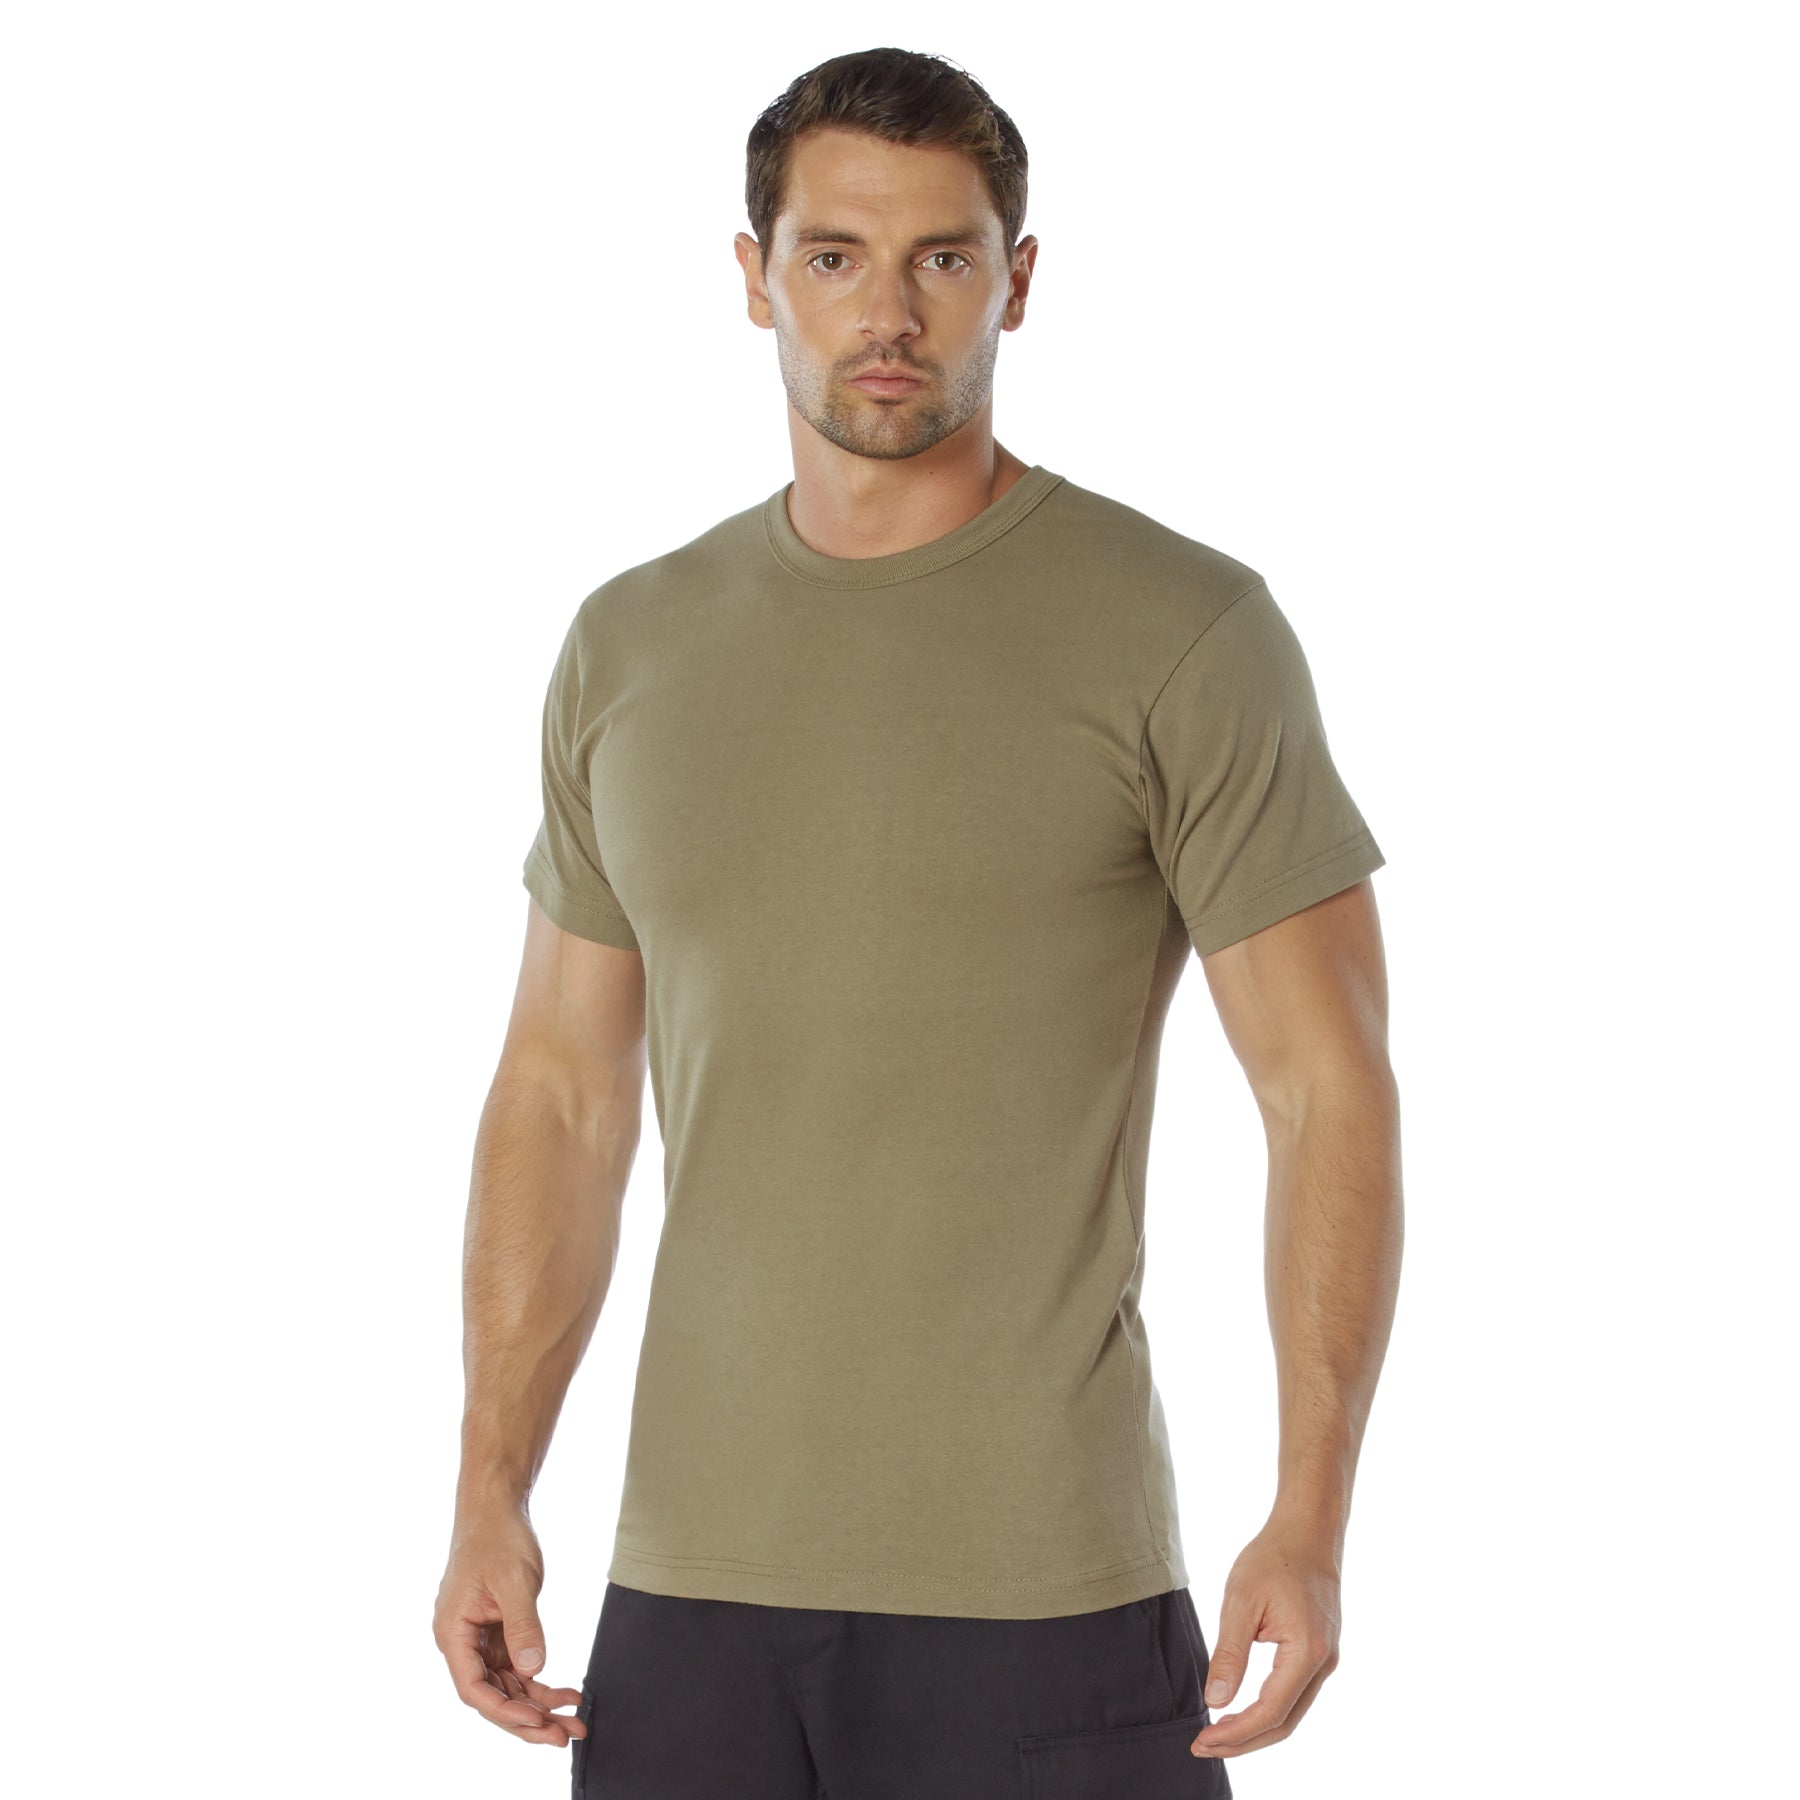 [AR 670-1] Poly/Cotton Heavyweight T-Shirts Coyote Brown AR 670-1